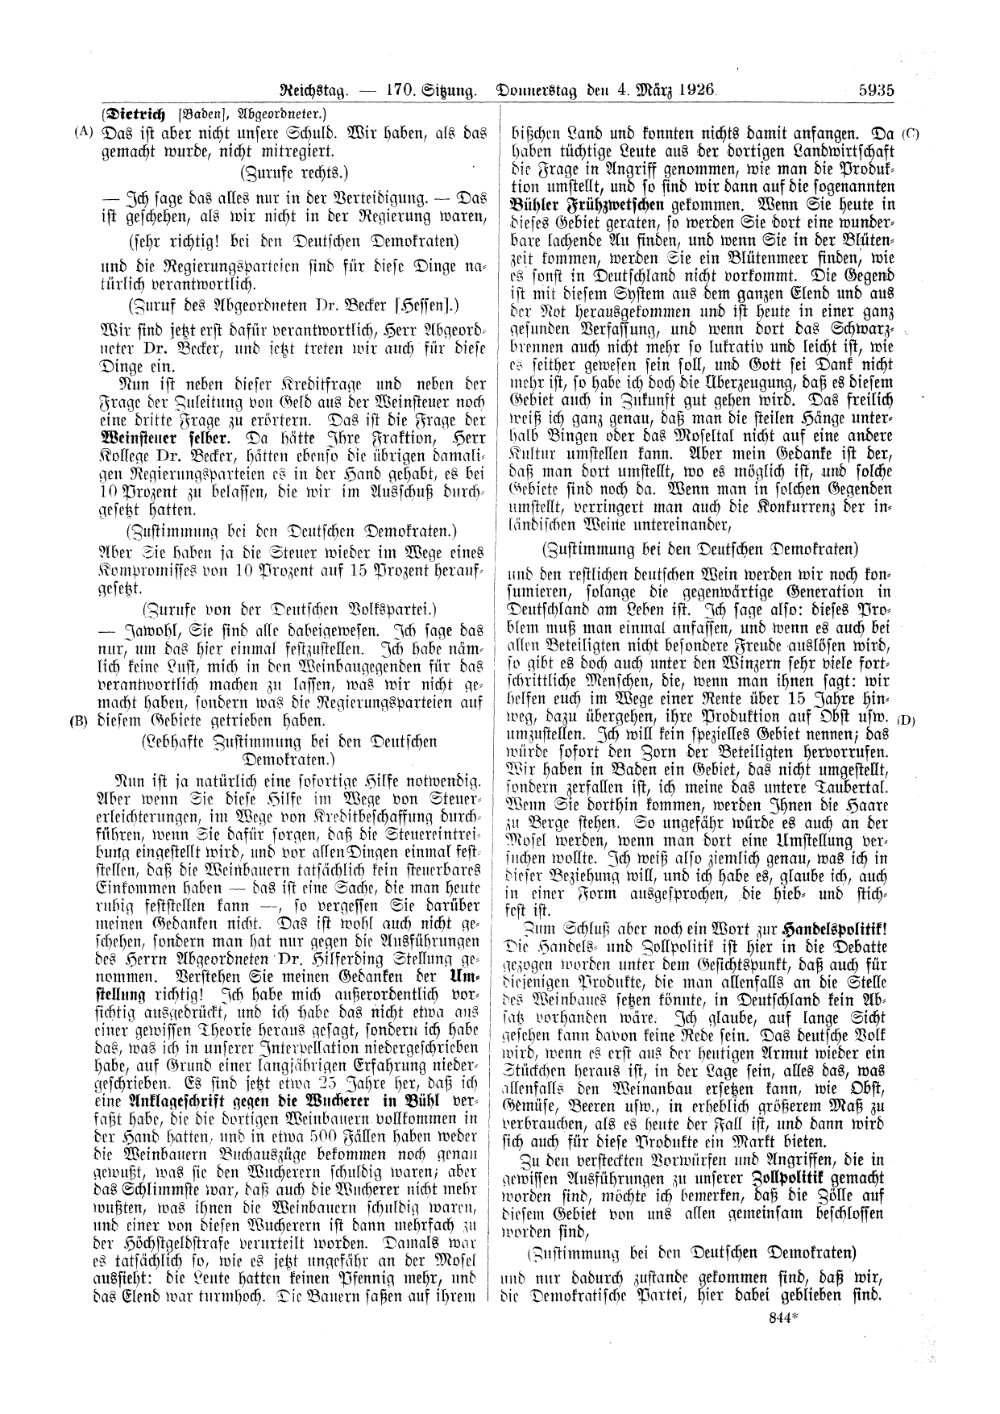 Scan of page 5935